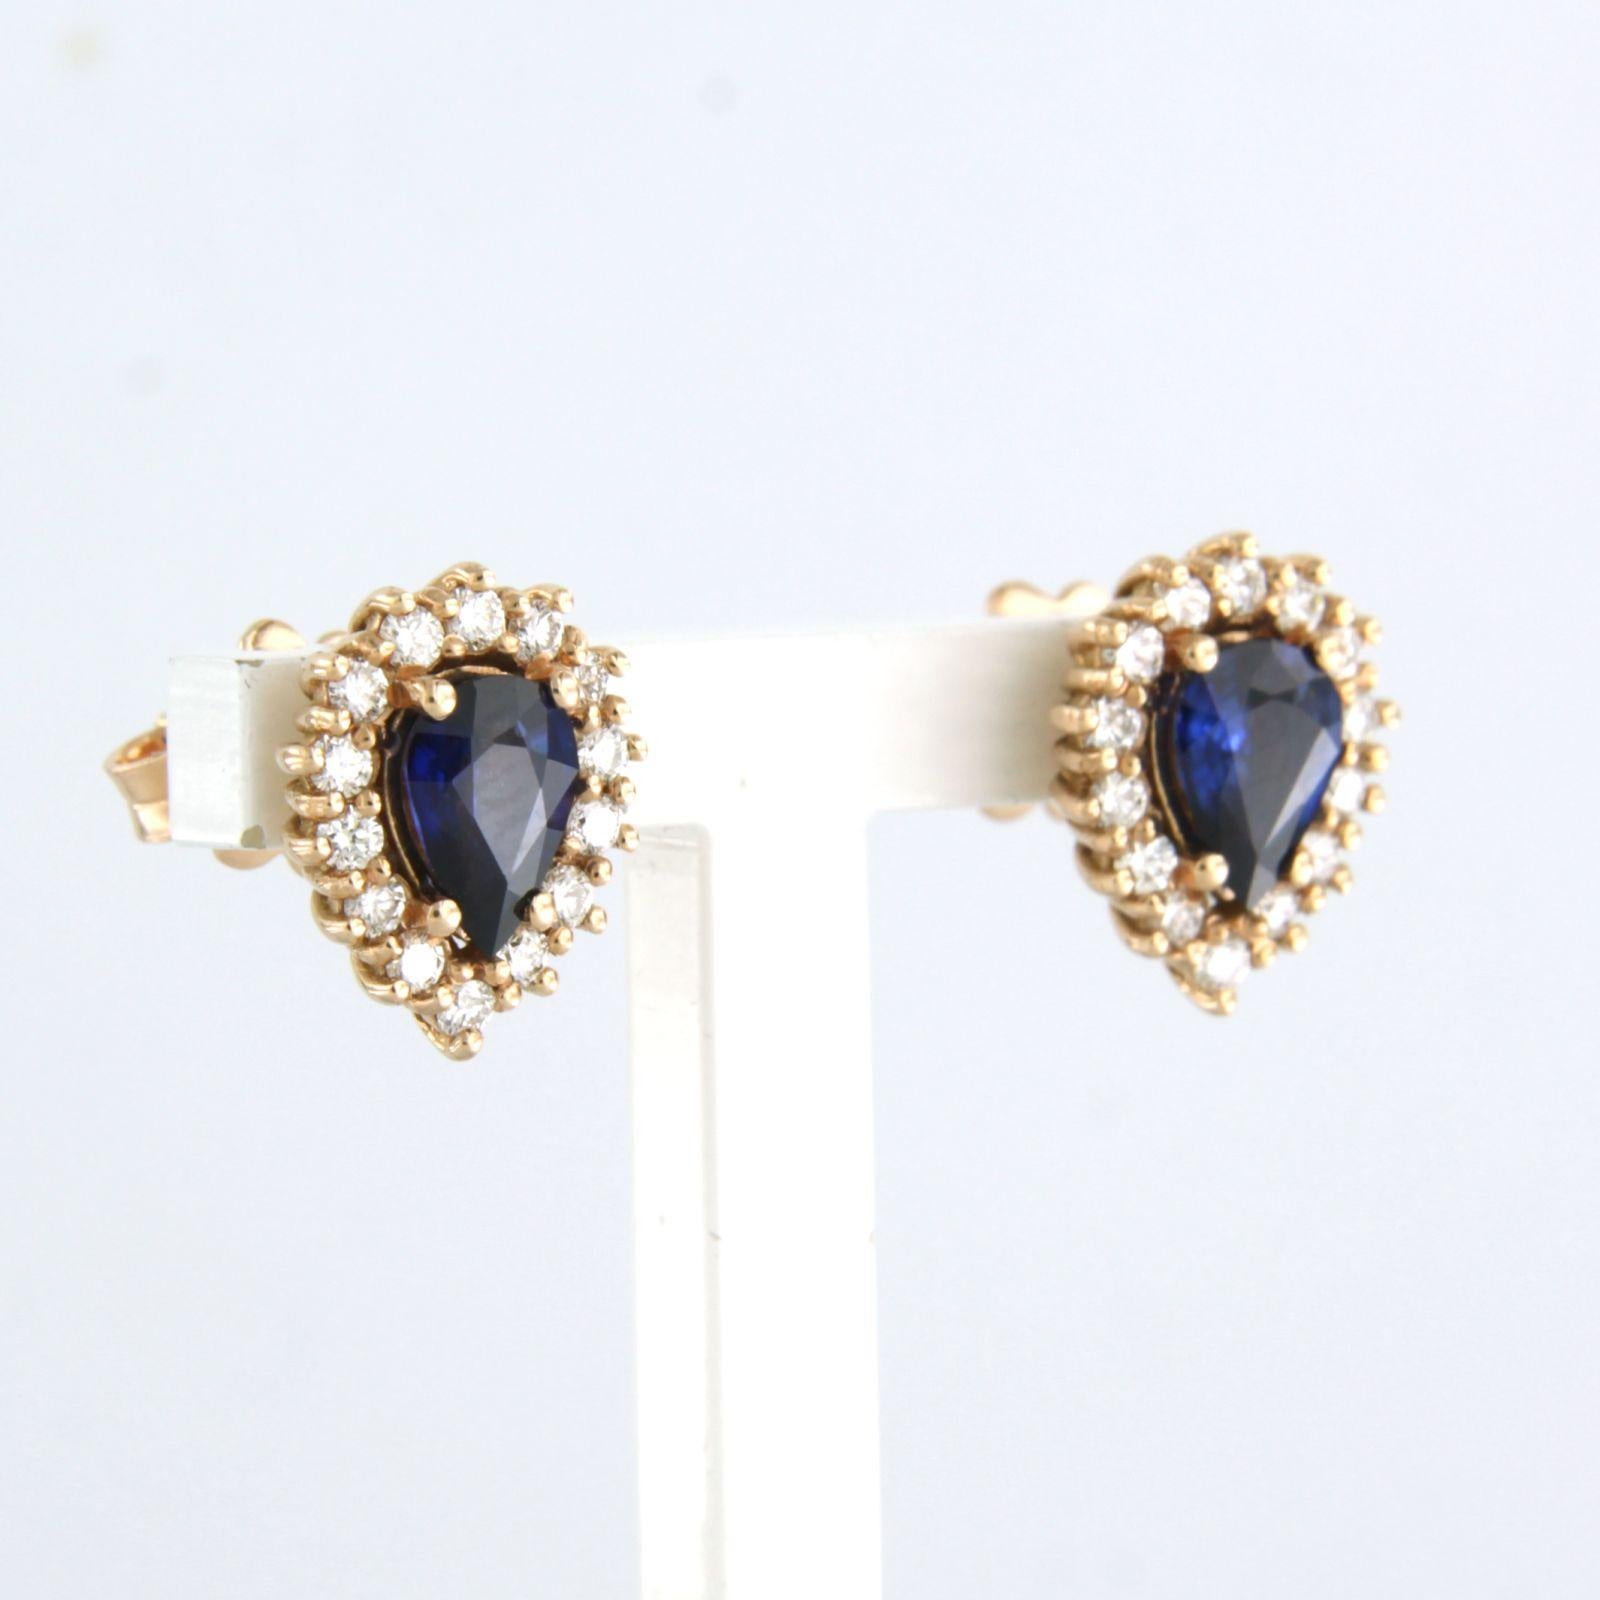 Modern Earrings set with Sapphire and diamond 18k pink gold